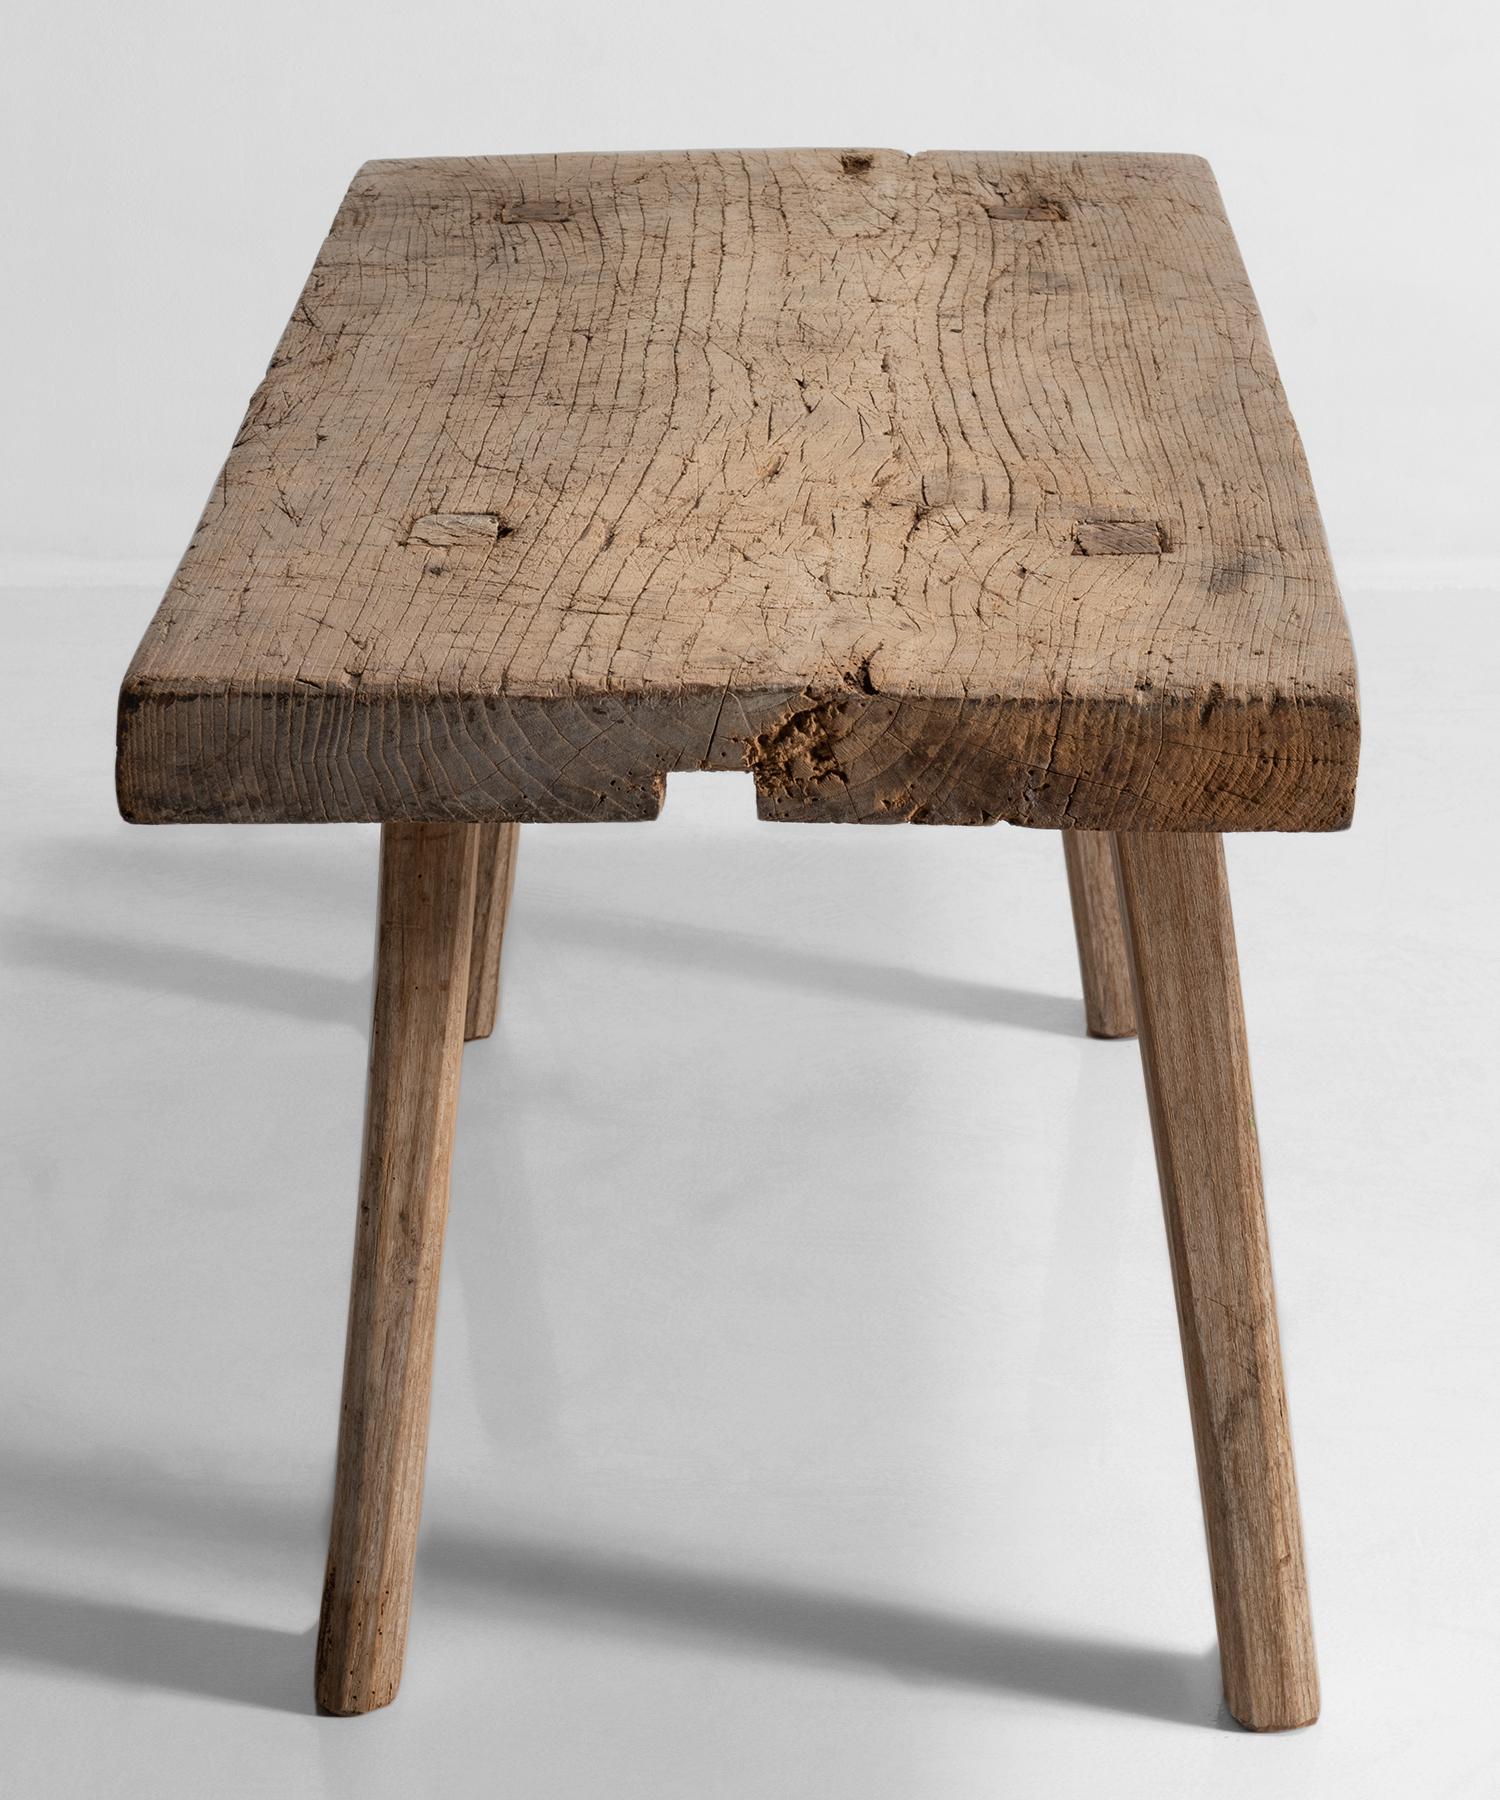 19th Century Primitive Bench / Coffee Table